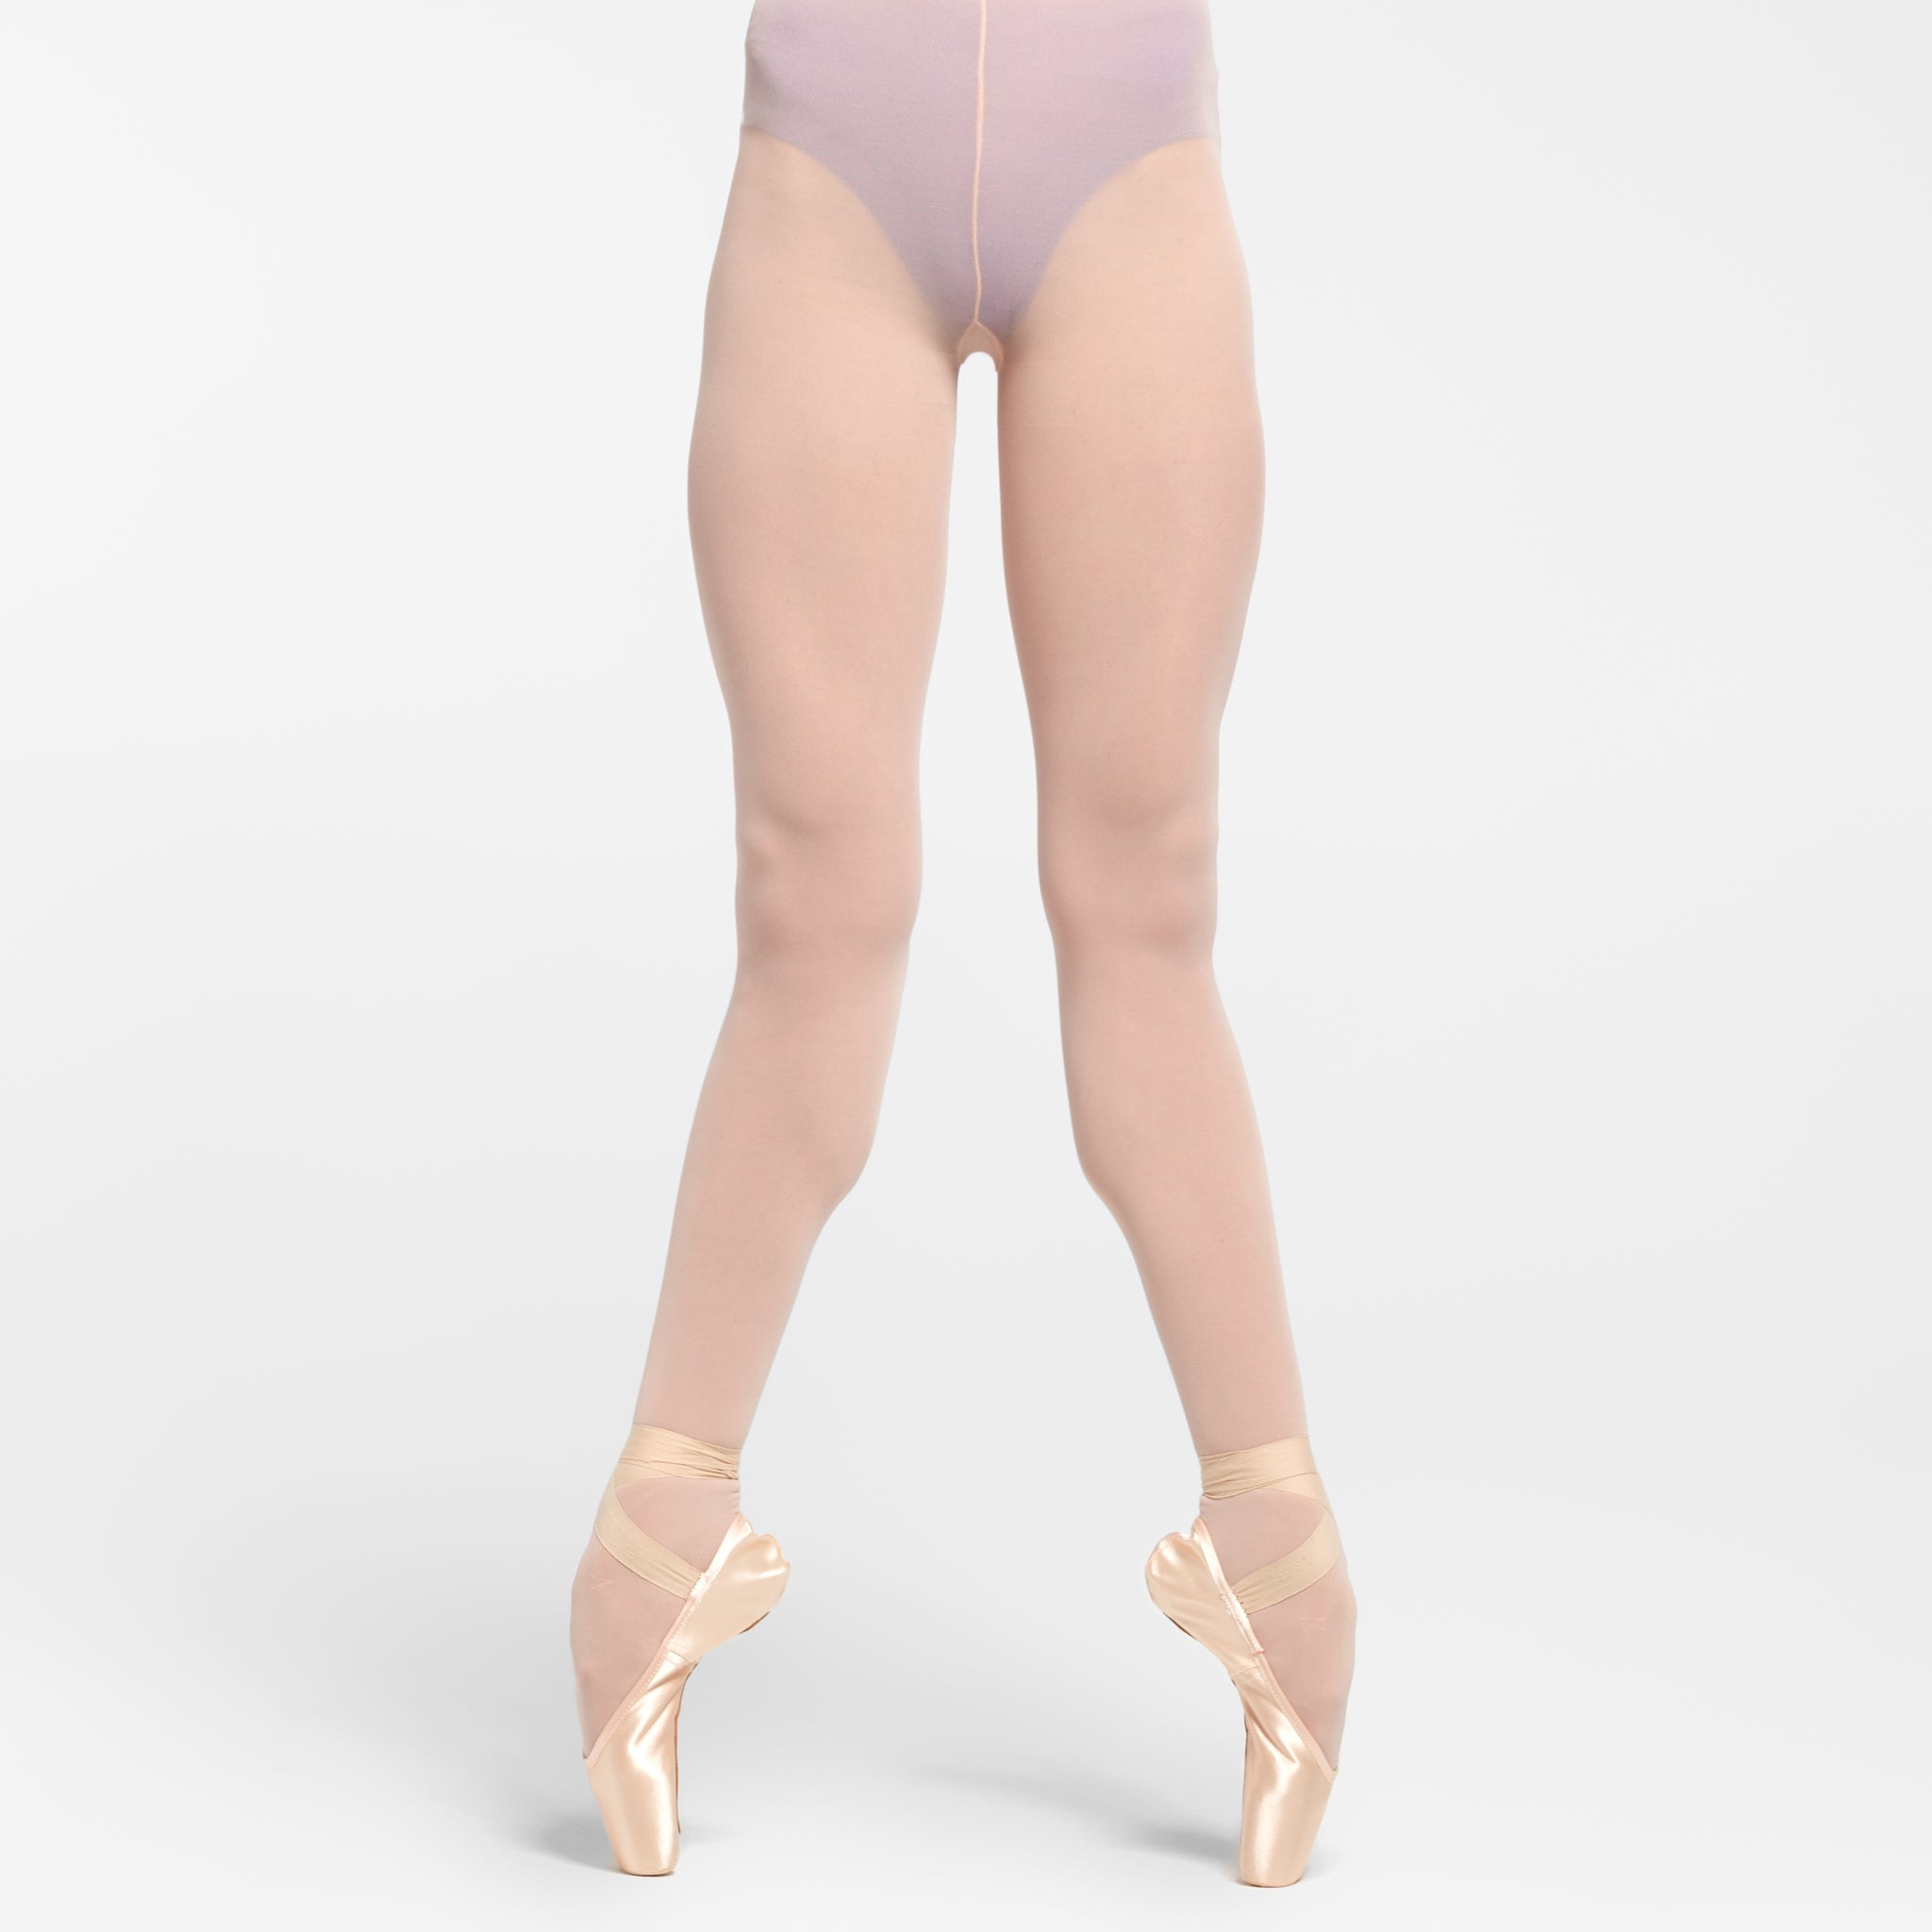 Z2 PERFORM! PROFESSIONAL PERFORMANCE BALLET TIGHTS WITH BACK SEAM -  Dancewear Boutique